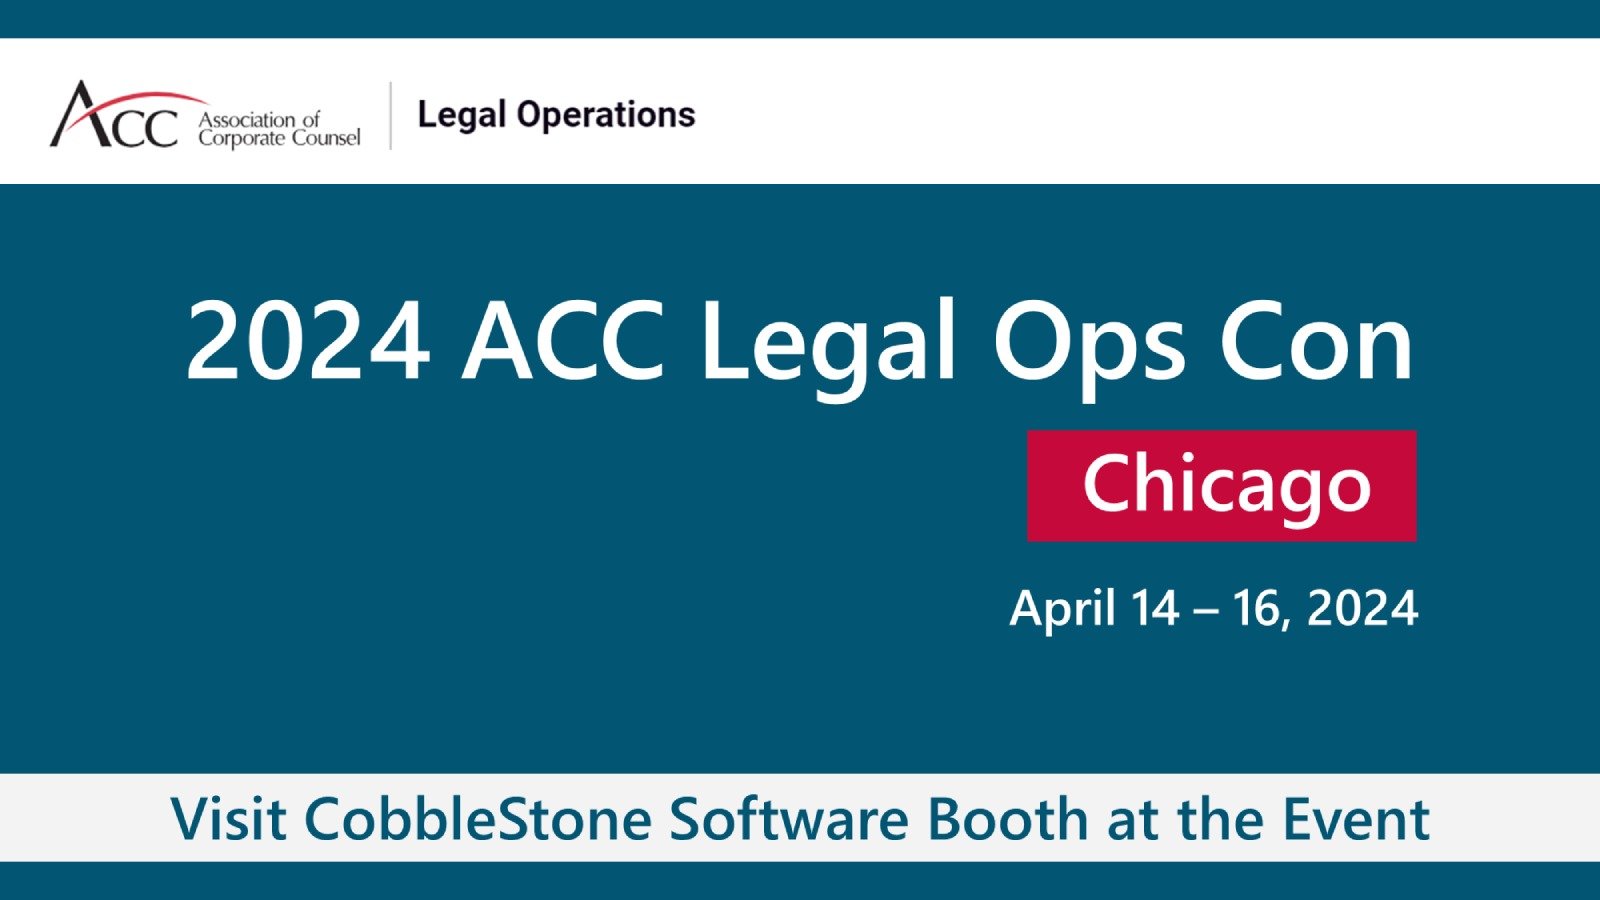 2024 ACC Legal Ops Con